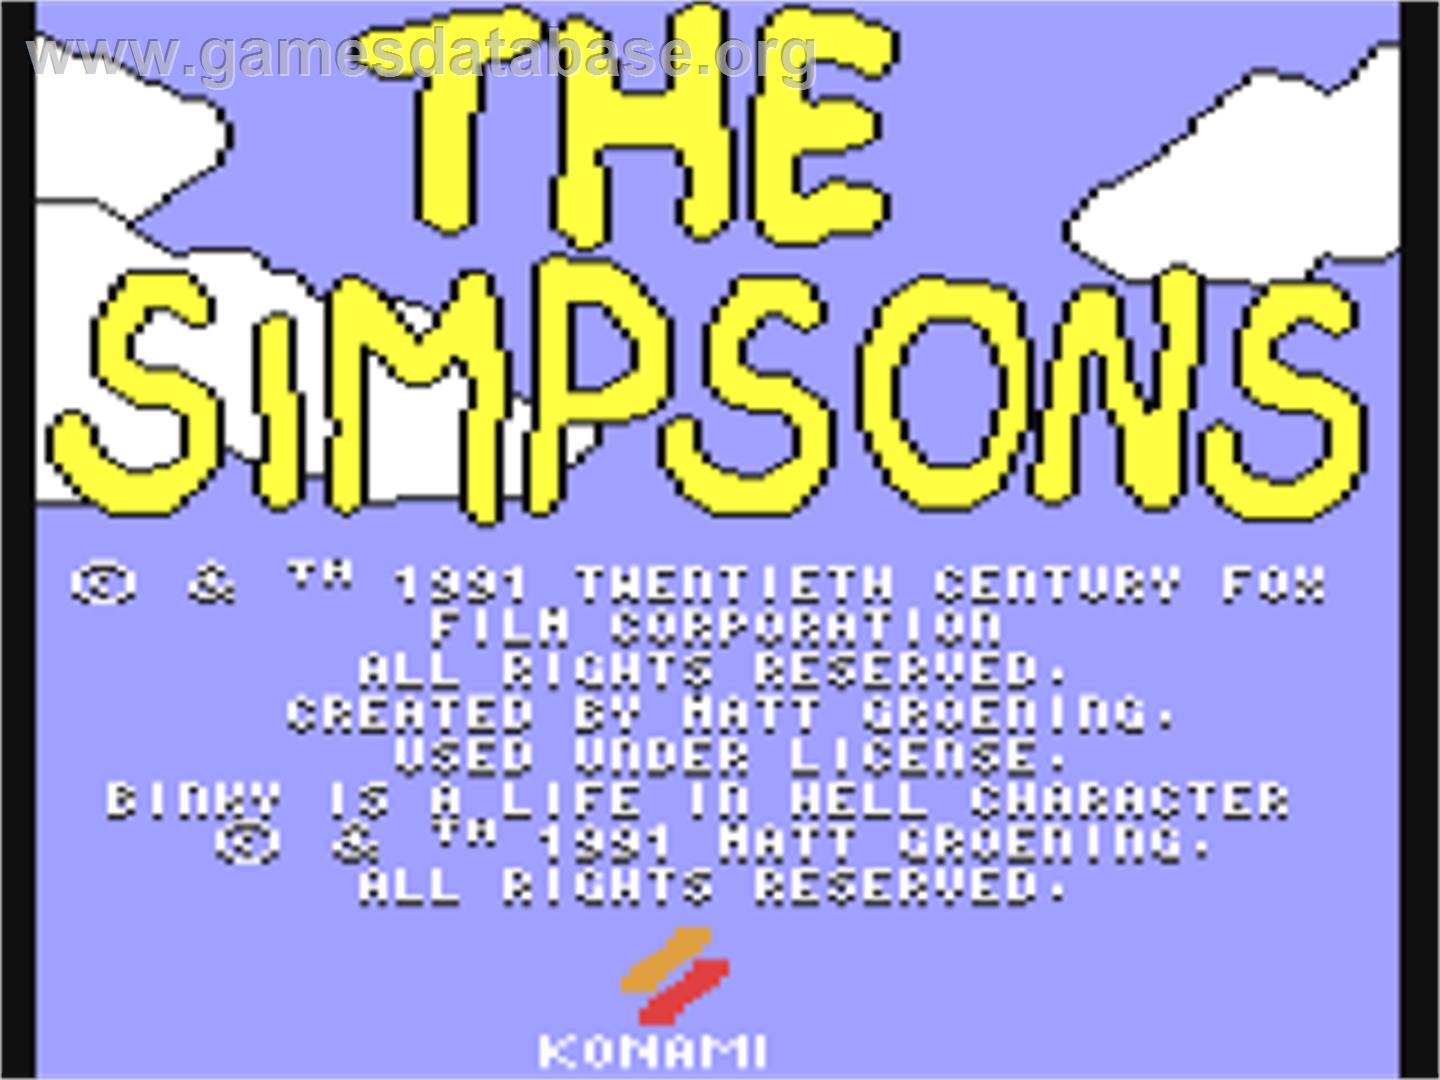 The Simpsons Arcade Game - Commodore 64 - Artwork - Title Screen